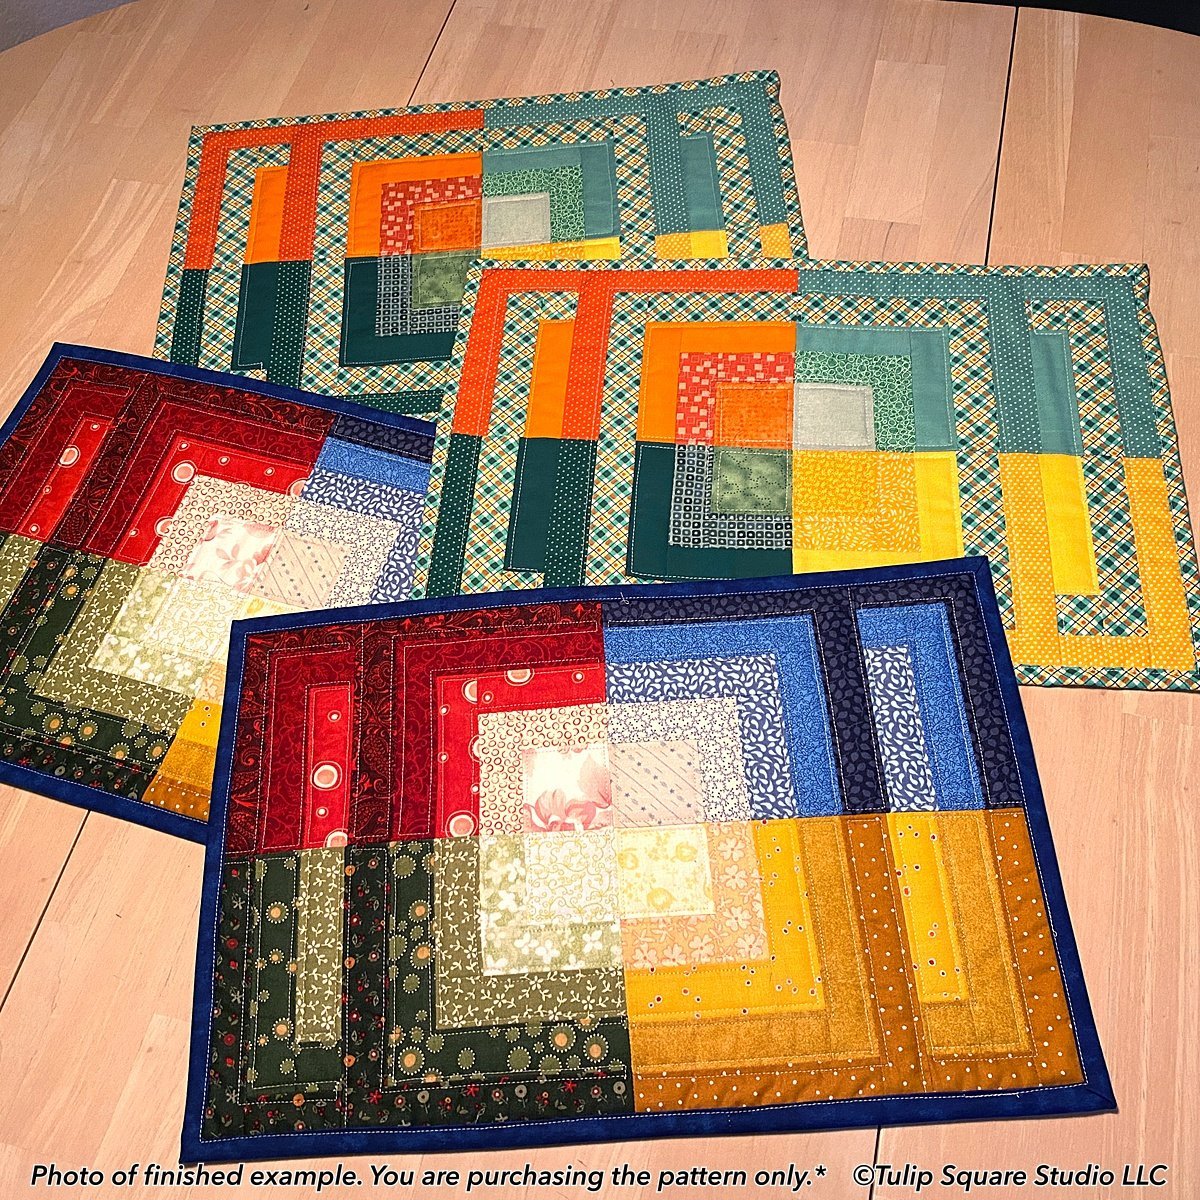 125 Quilt As You Go - Placemat — Ceramic Grill Store